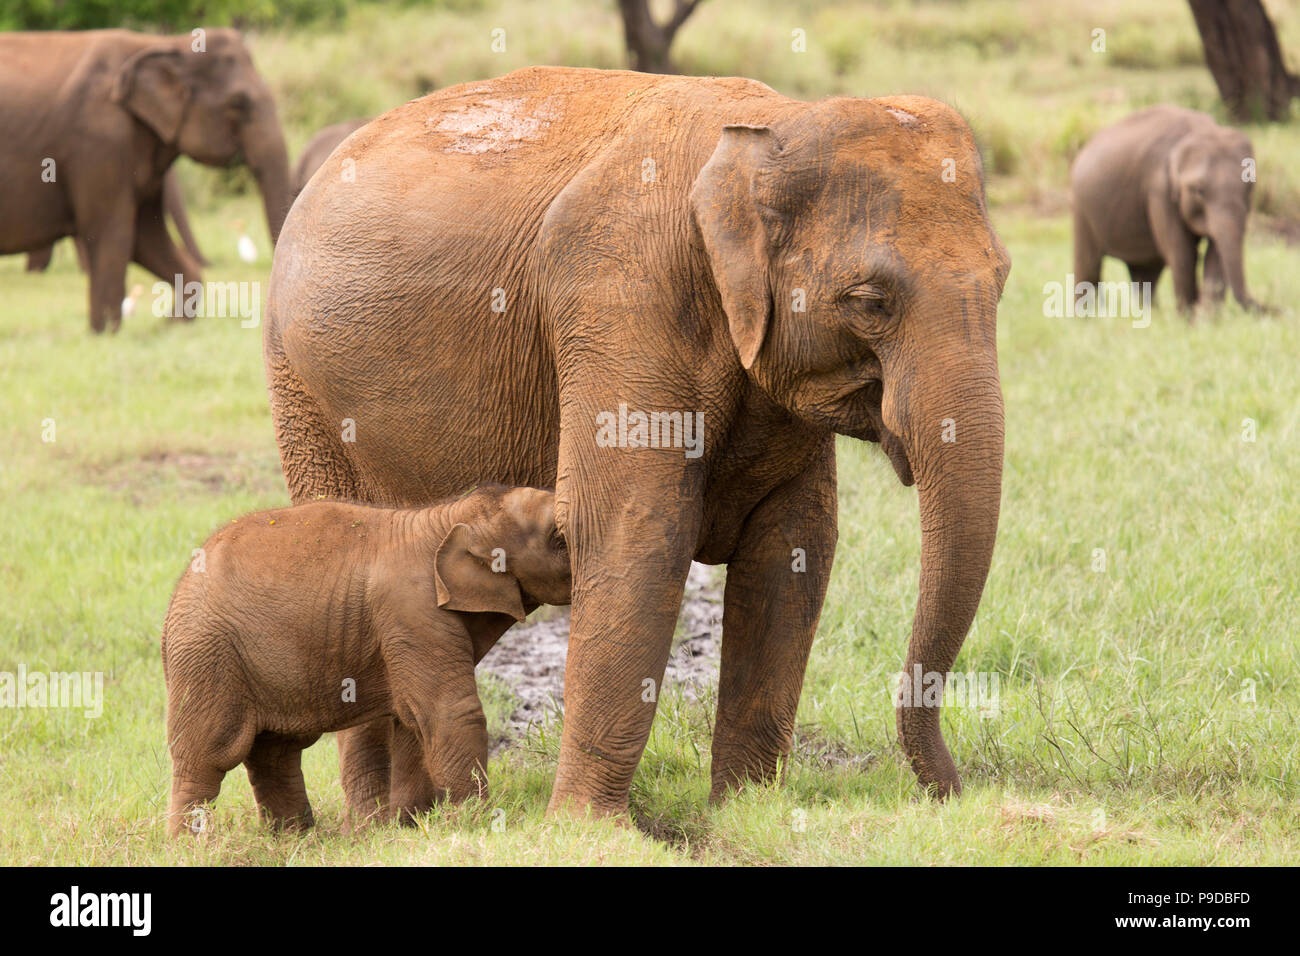 An elephant calf feeding in Minneriya National Park in Sri Lanka. Elephants (Elephas maximus) are renowned for congregating around the reservoir in Mi Stock Photo